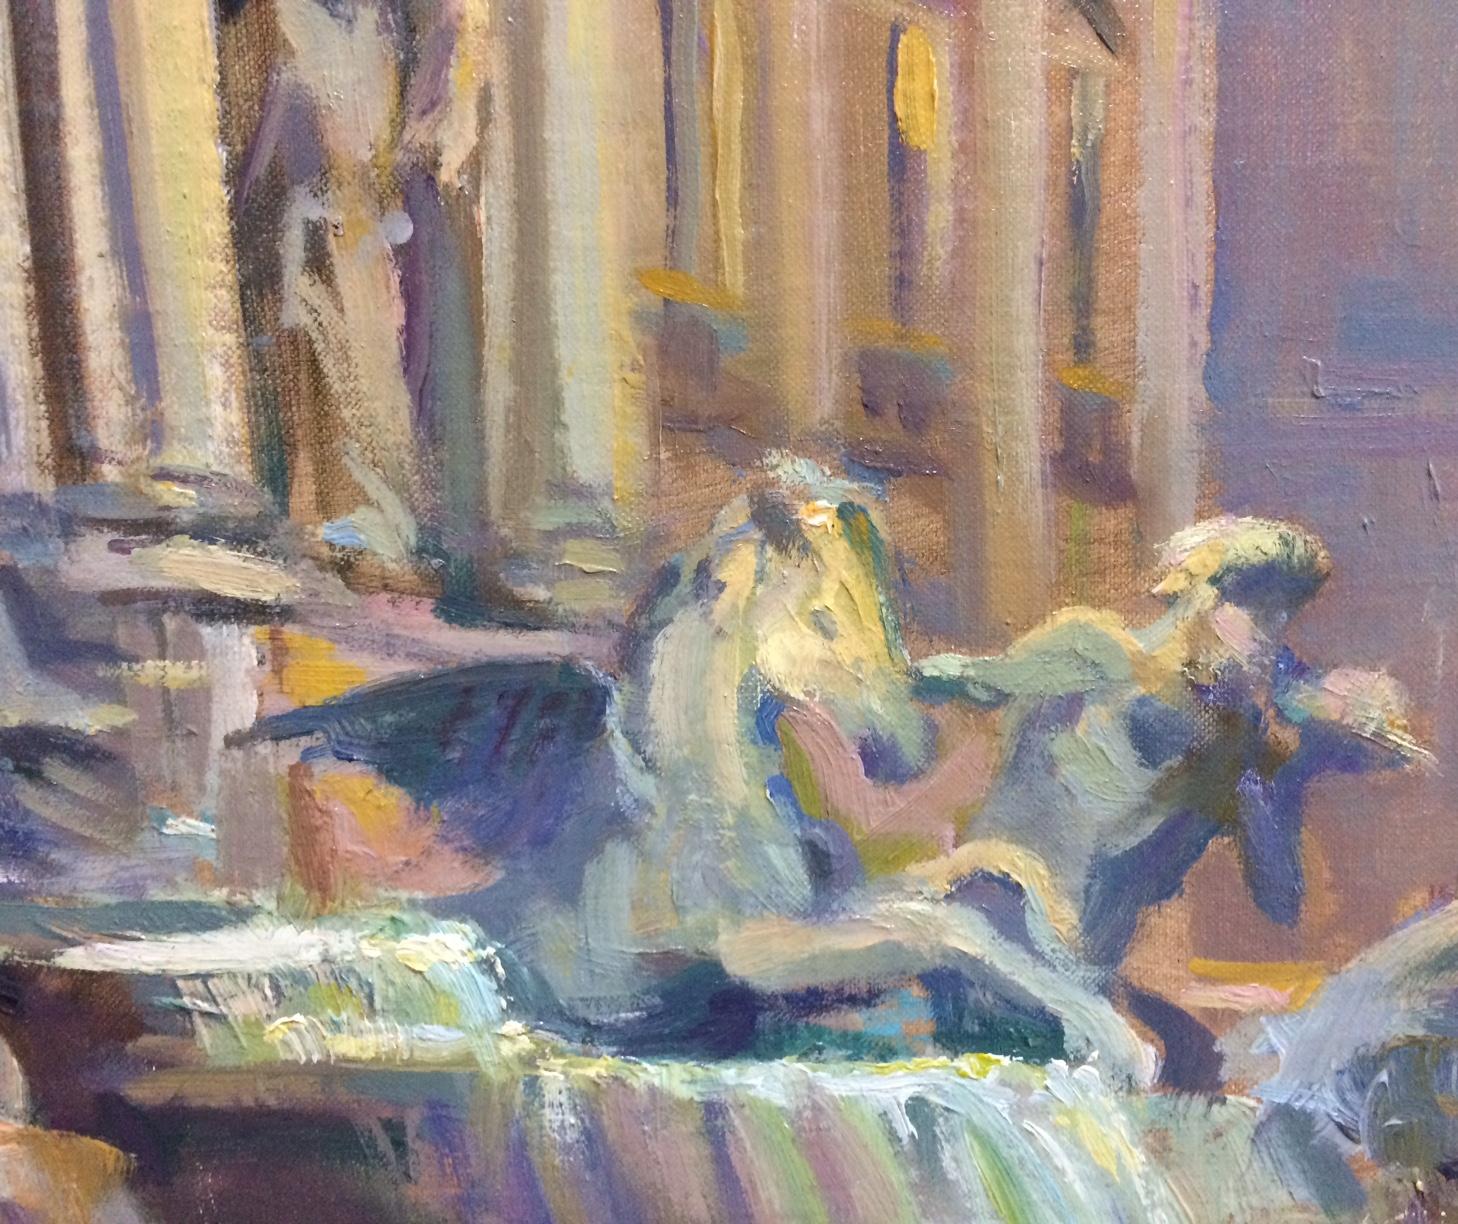 The subtelty of the pastel coloration of the brush strokes in this impressionistic depiction of the renowned Trevi Fountain of Rome, Italy, couples majestically with the strong, intentional brush strokes which add motion and depth to this original